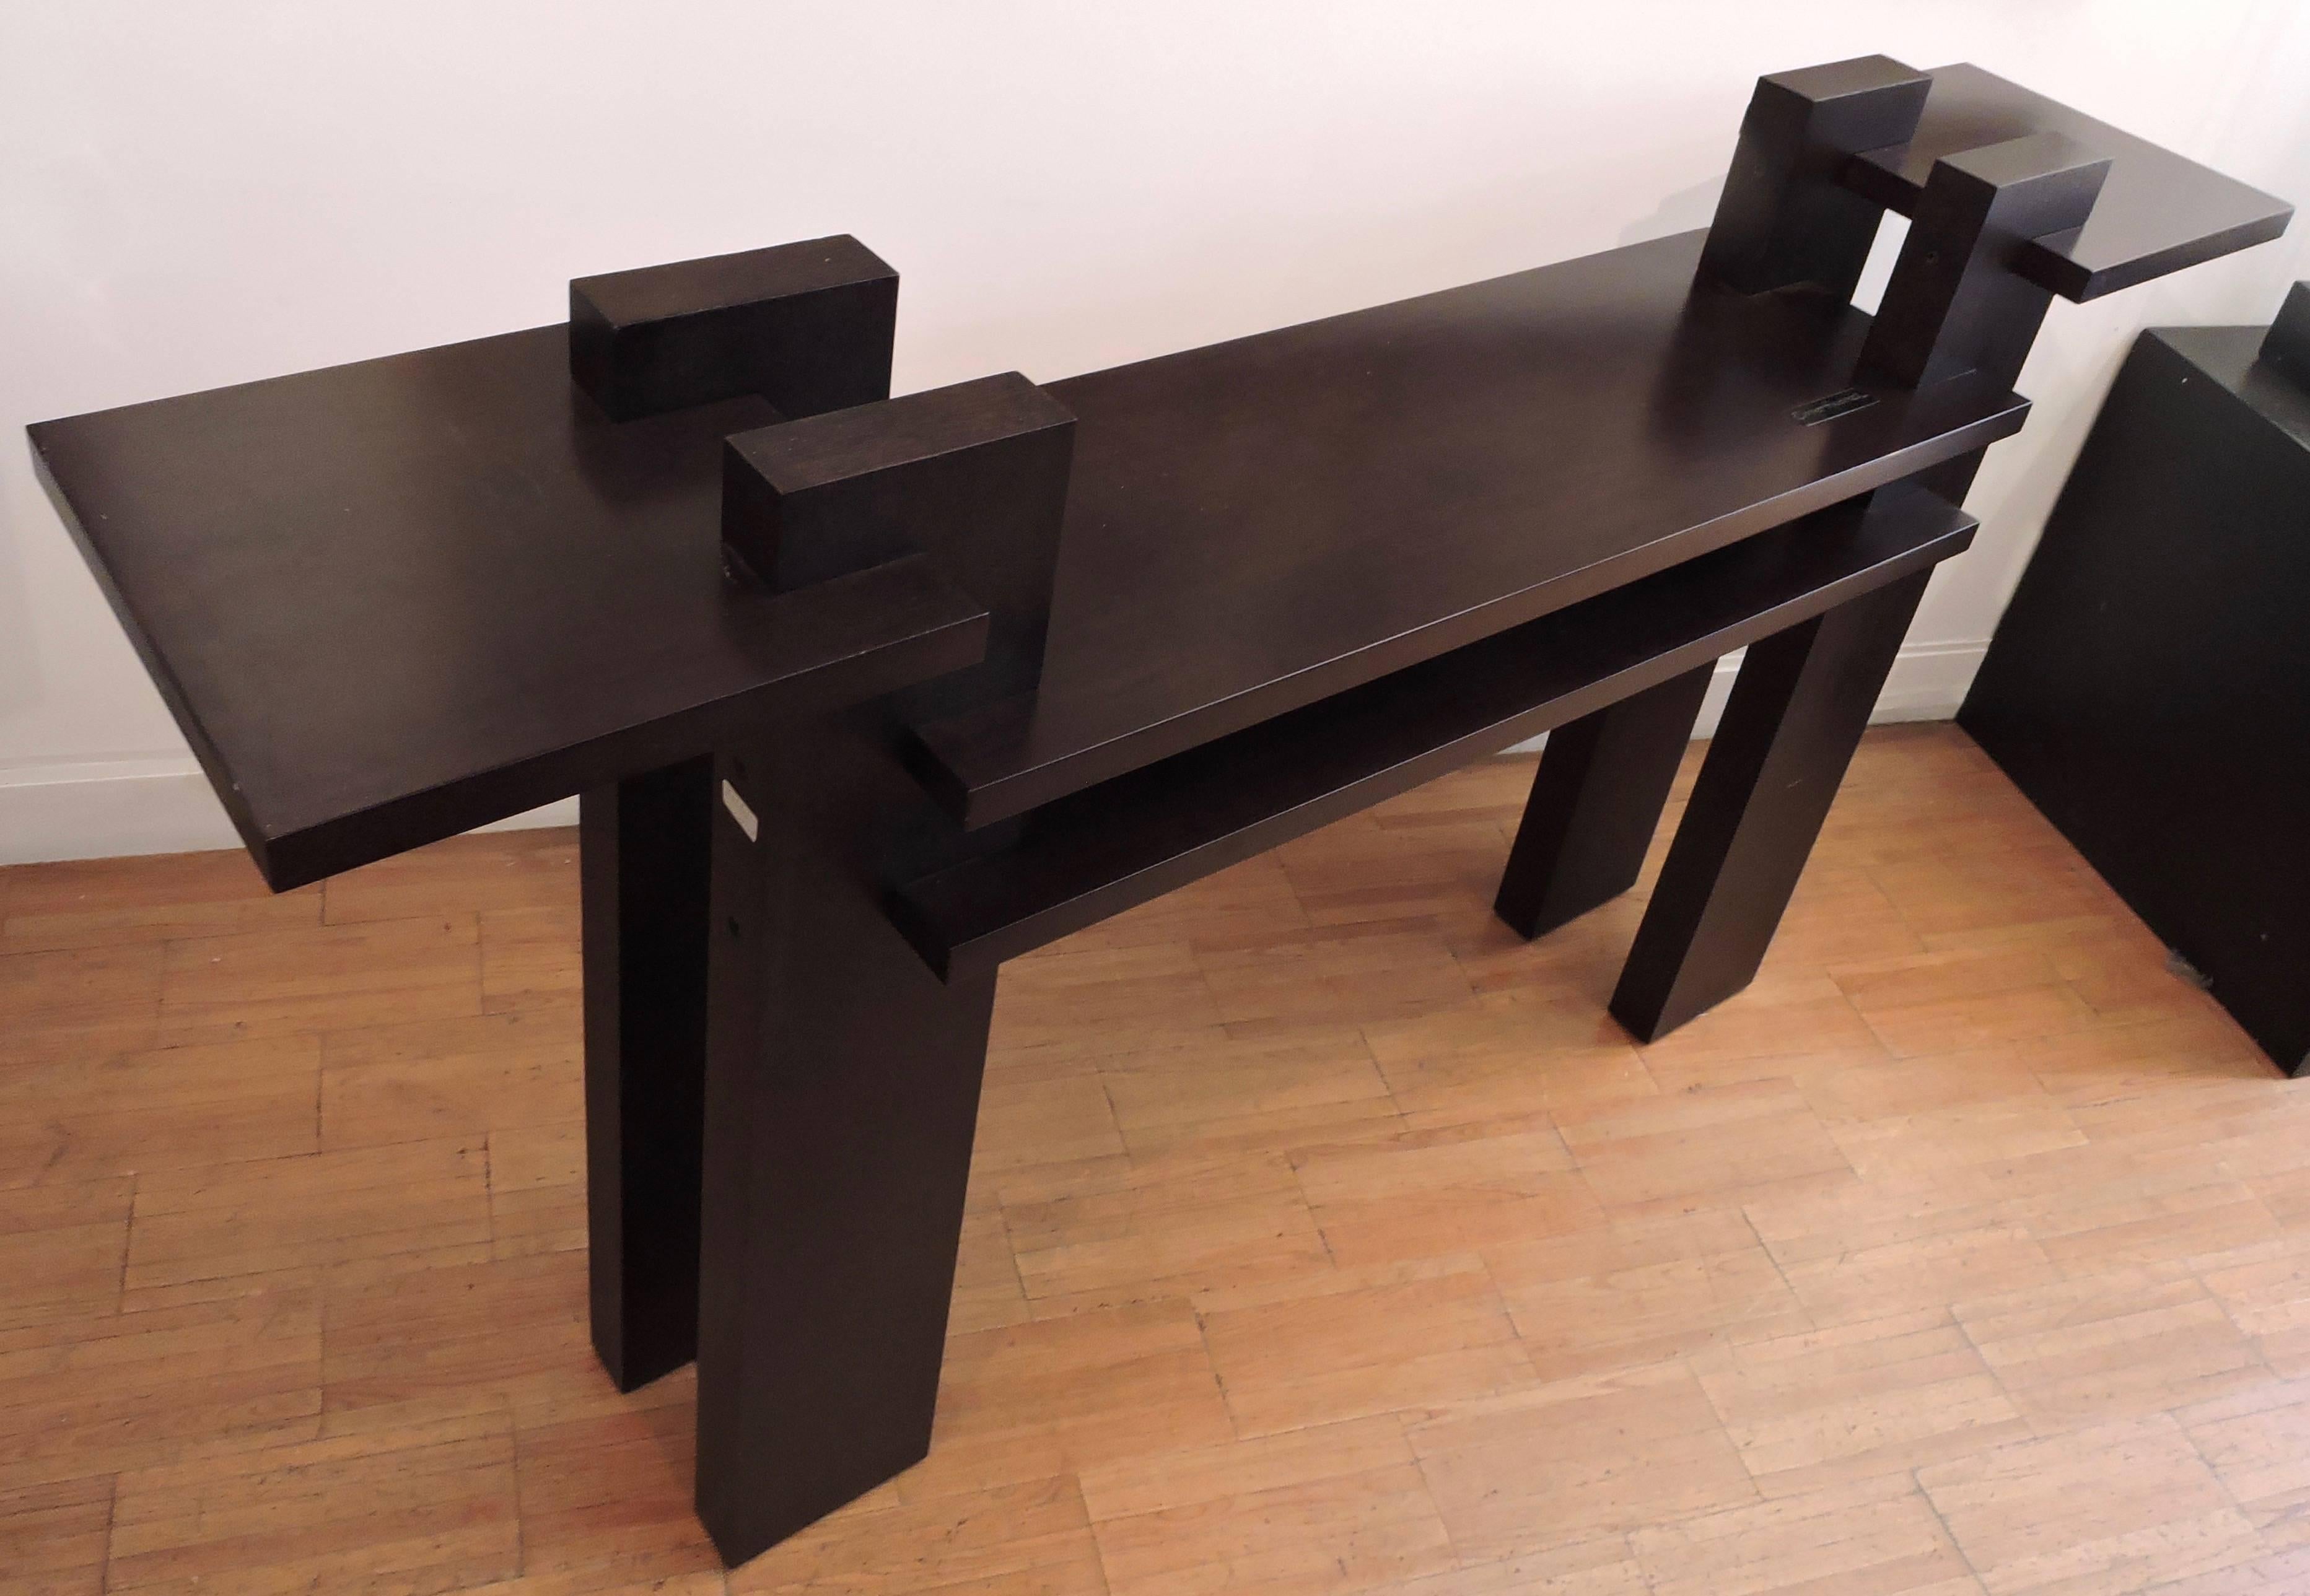 Helène Clemmer Heidsieck 

Console table
wood (ash for horizontal surfaces and beech tree for the legs)
signed Clemmer Heidsieck

Measures: H 99 cm x L 181 cm x W 36 cm.
         